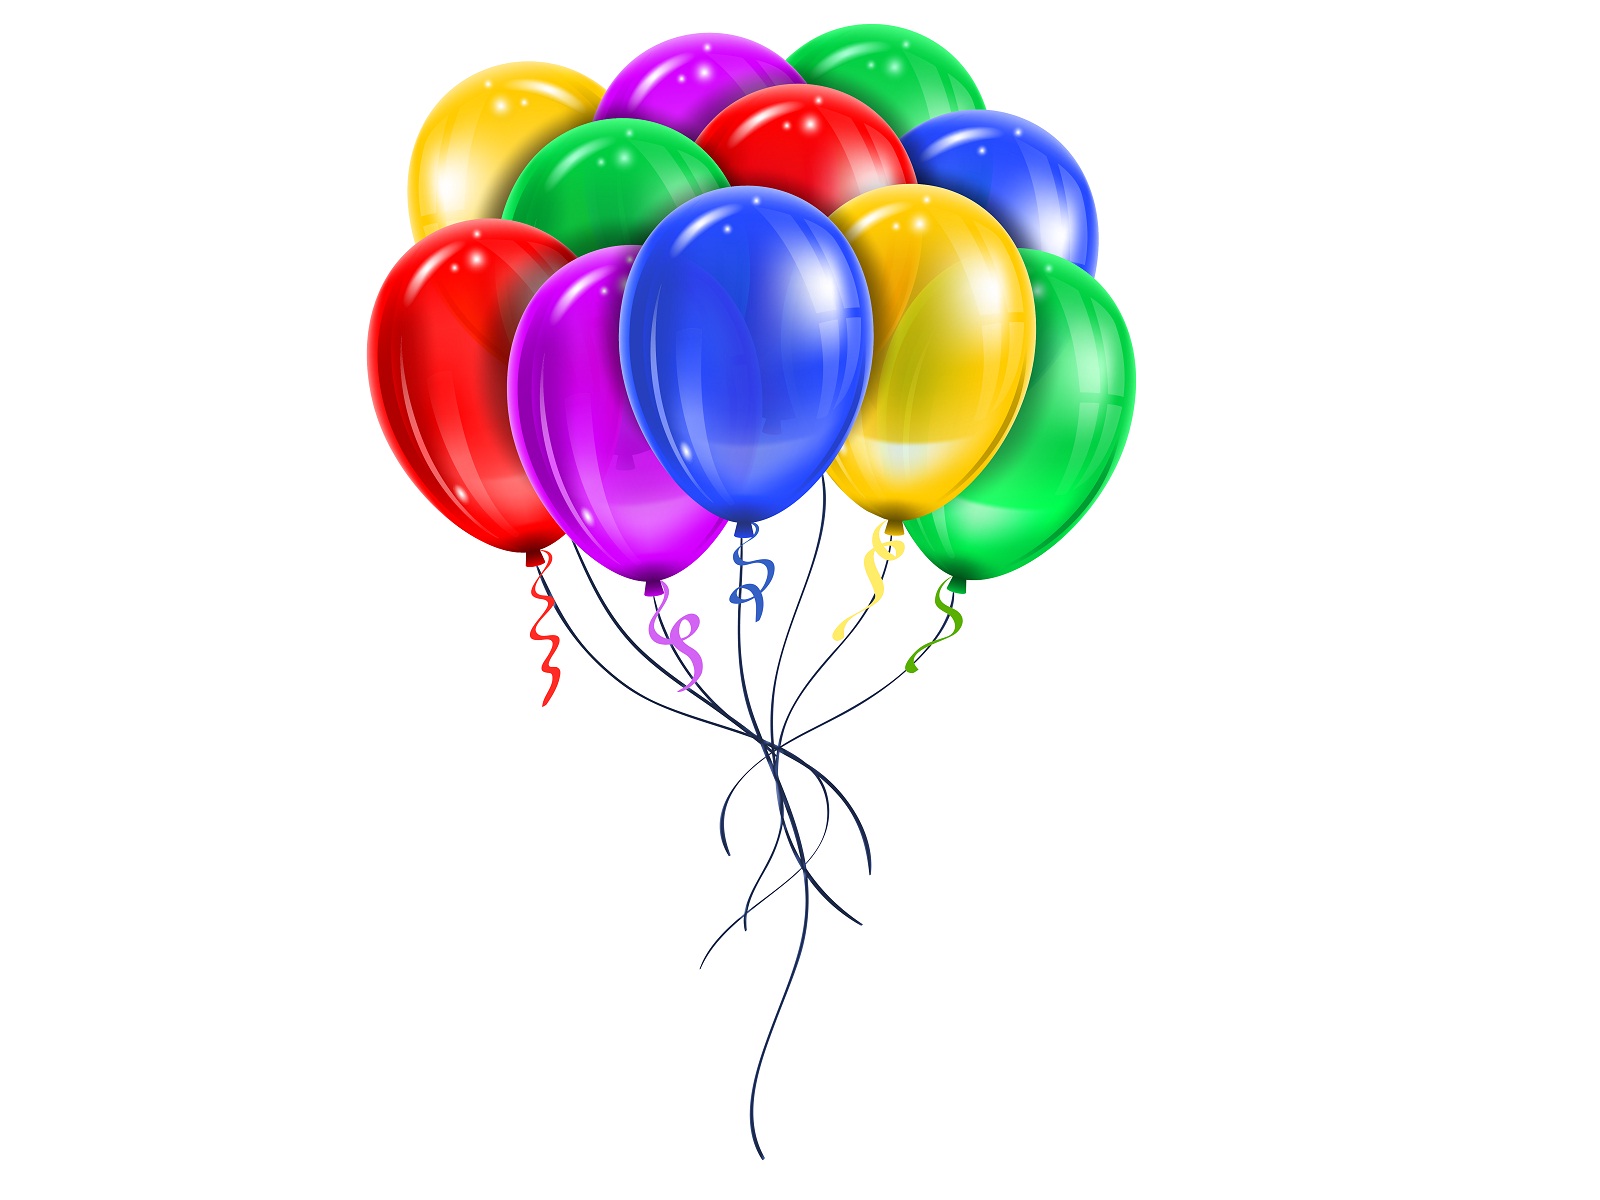 Happy birthday wishes colorful balloons HD Wallpapers Rocks